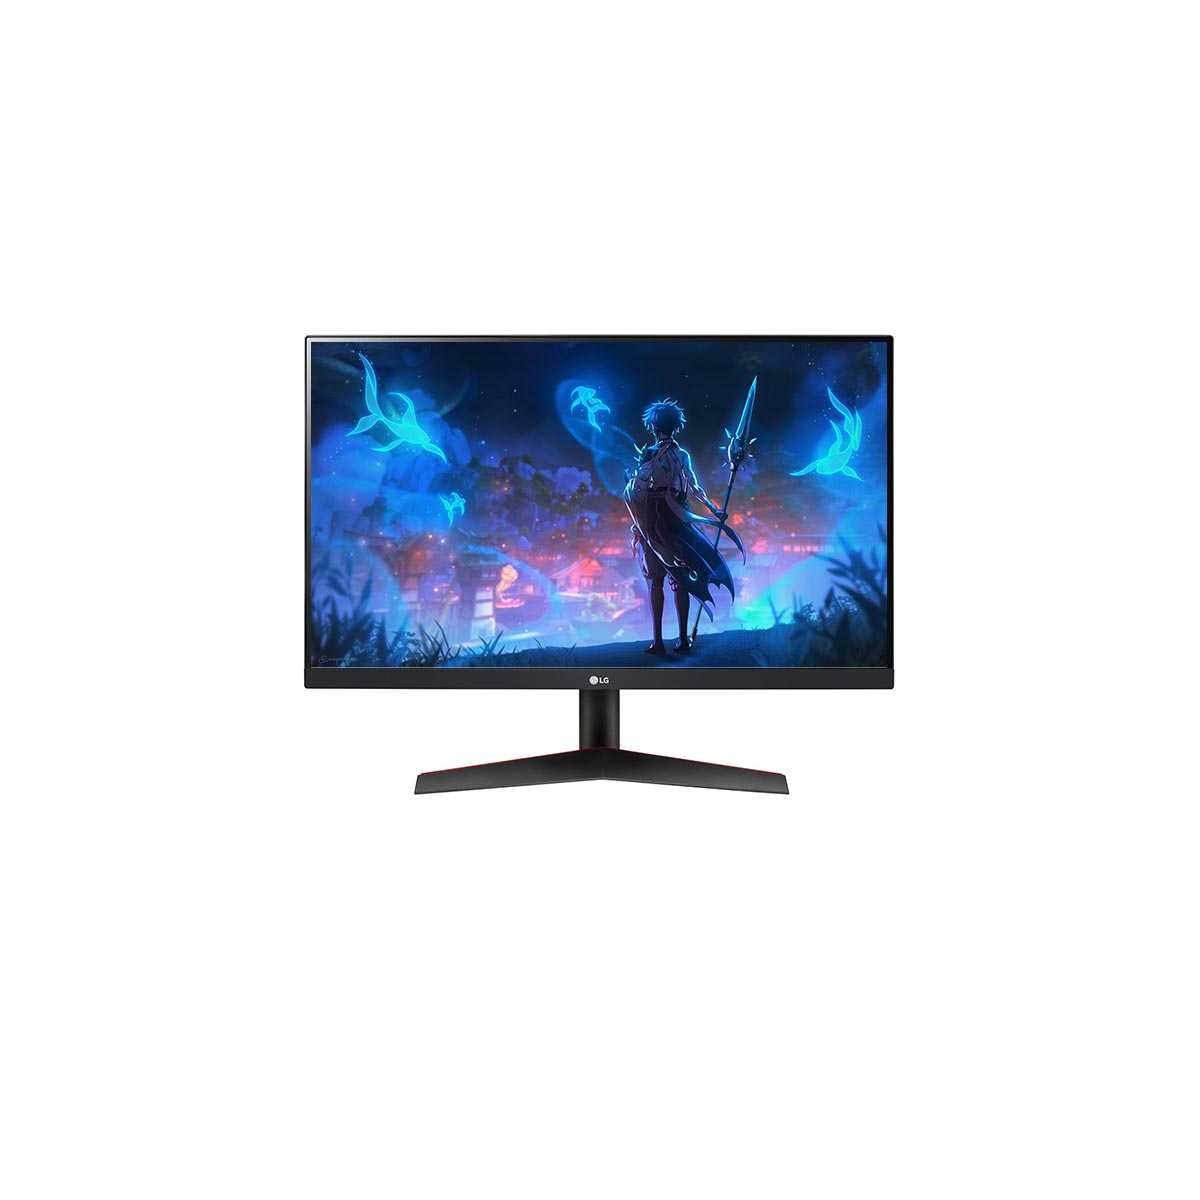 LG 24GN600-B Ultra Gear™ Full HD IPS 1ms (GtG) Gaming Monitor with 144Hz, 24GN600-B